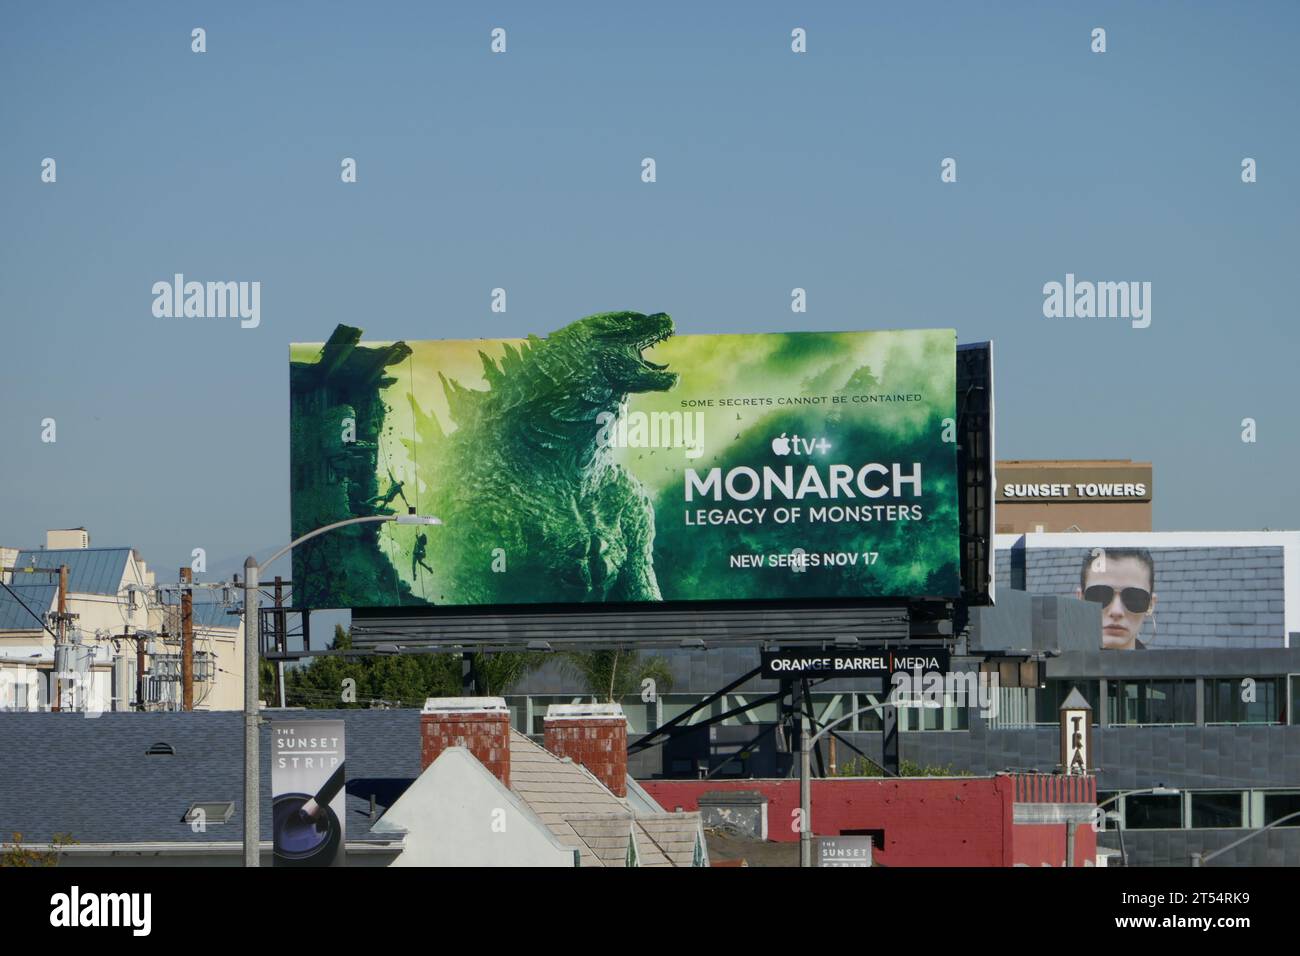 Los Angeles, California, USA 2nd November 2023 Monarch Legacy of Monsters Billboard on November 2, 2023 in Los Angeles, California, USA. Photo by Barry King/Alamy Stock Photo Stock Photo